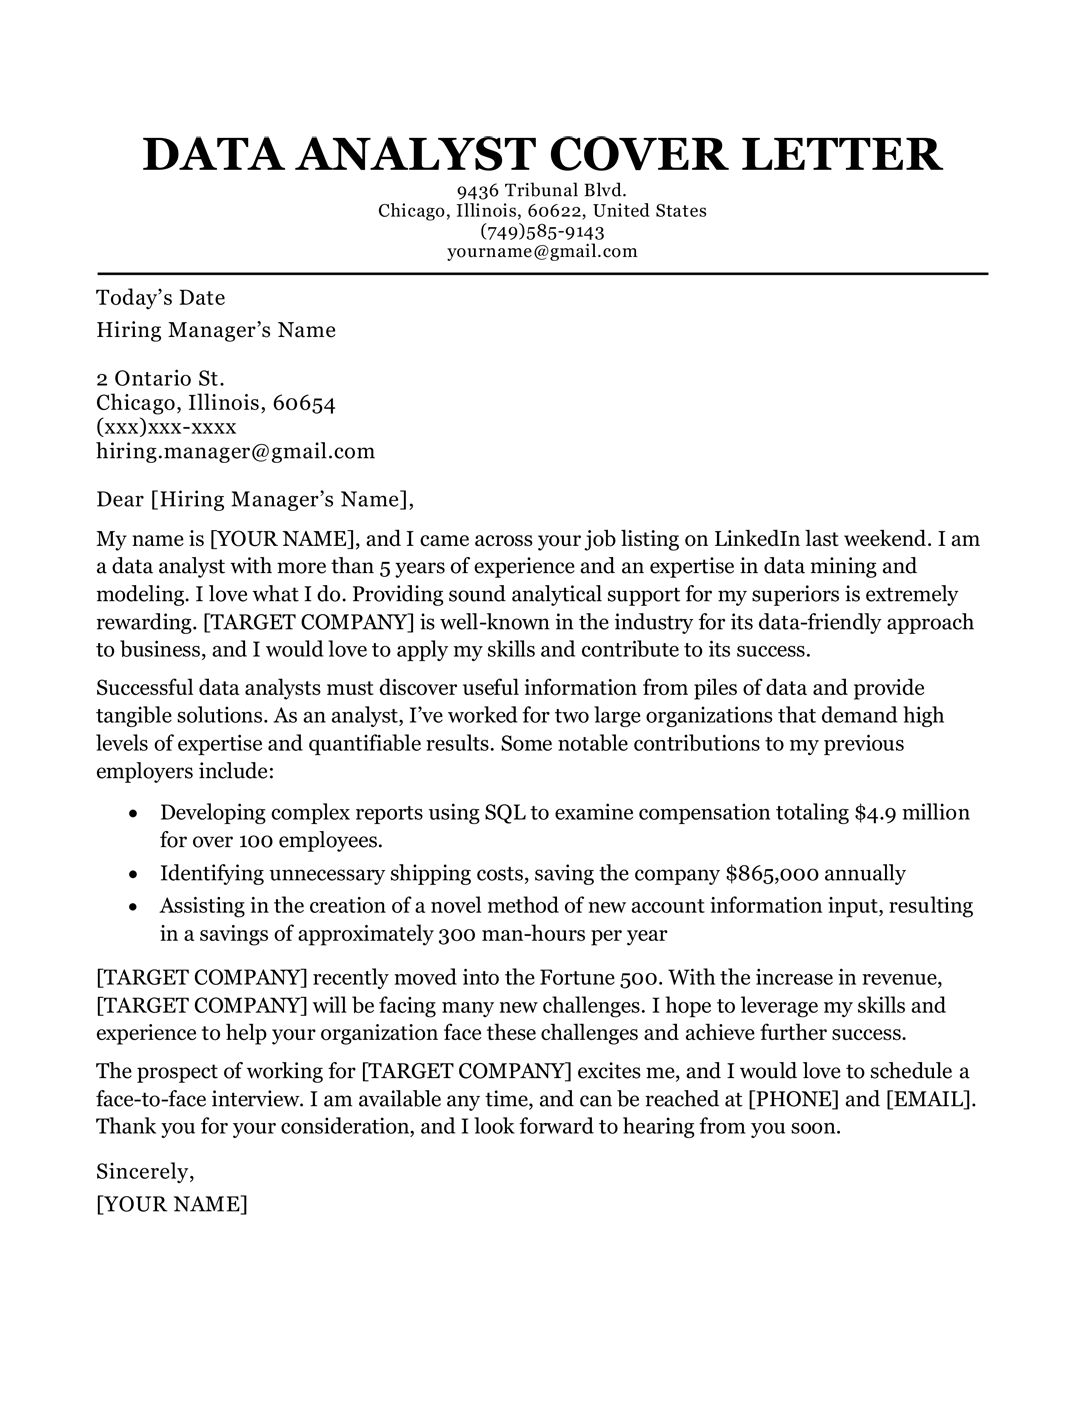 data analyst director cover letter